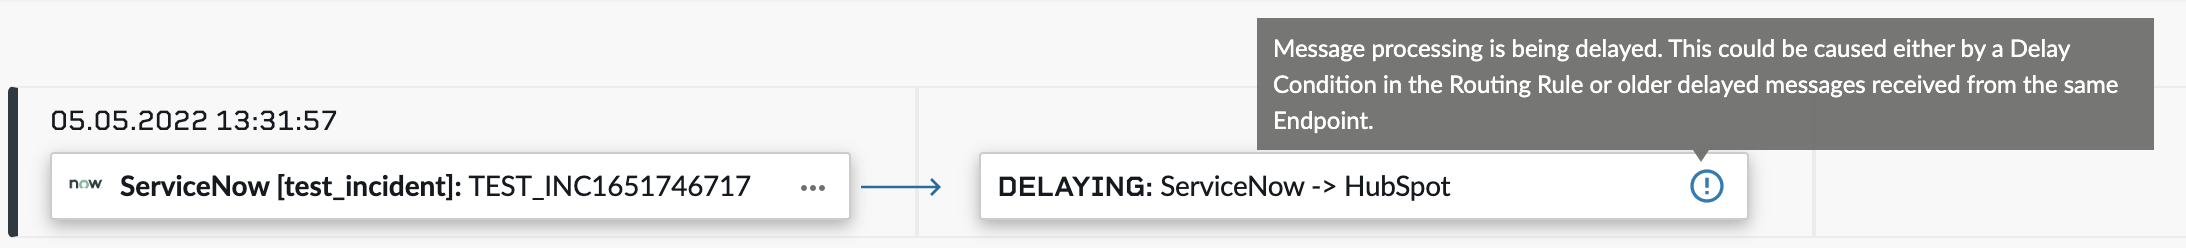 Delayed_2.png